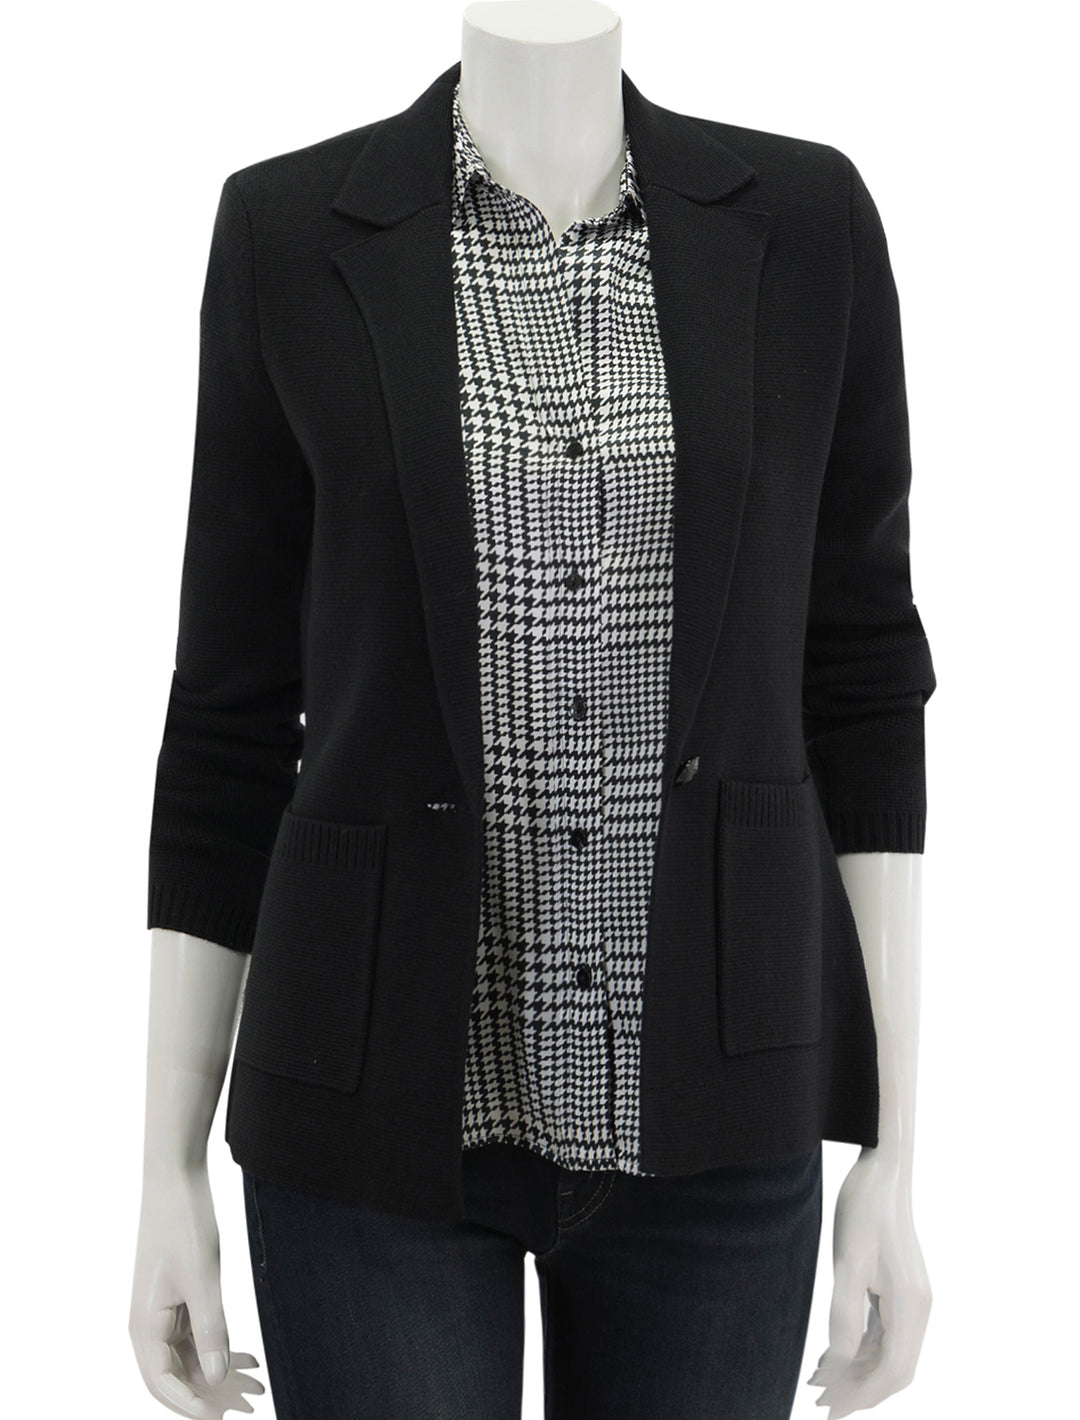 Front view of L'agence's lacey knit blazer in black, unbuttoned.